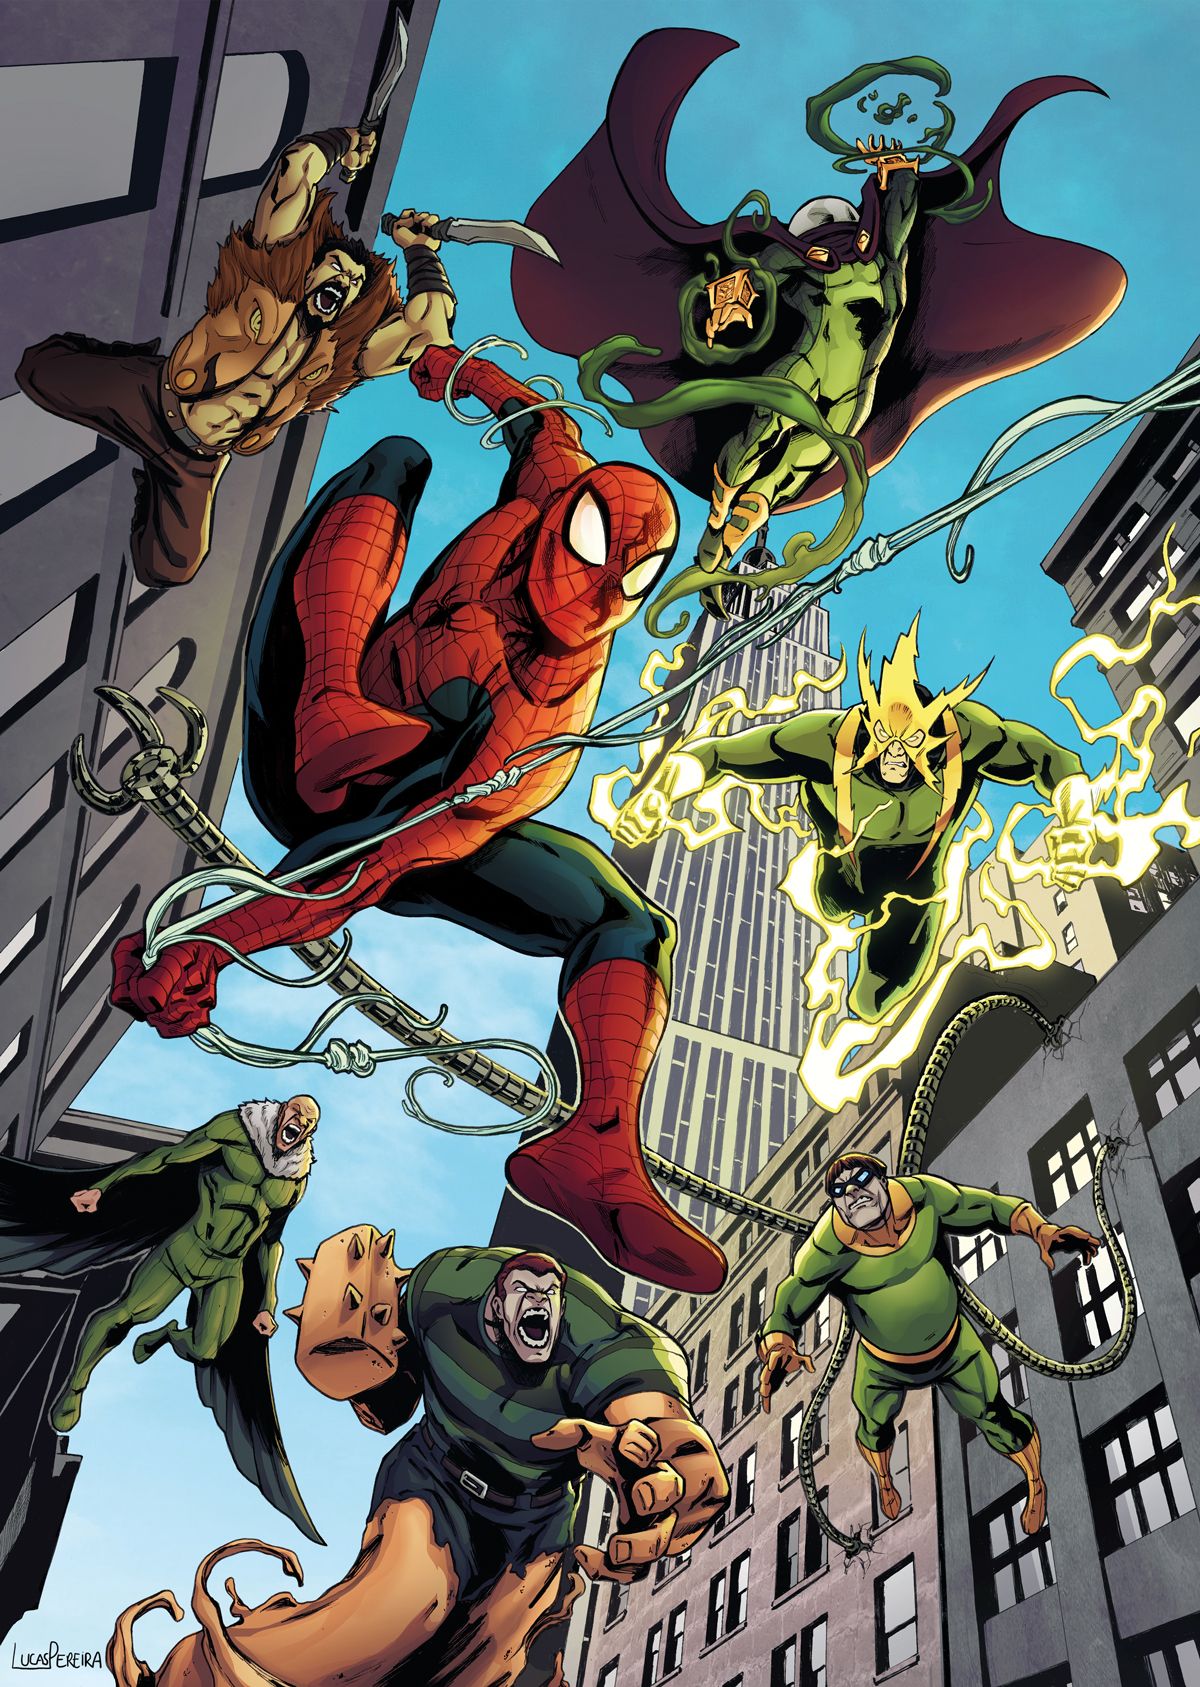 Spiderman and The Sinister Six. Marvel spiderman art, Amazing spiderman, The sinister six